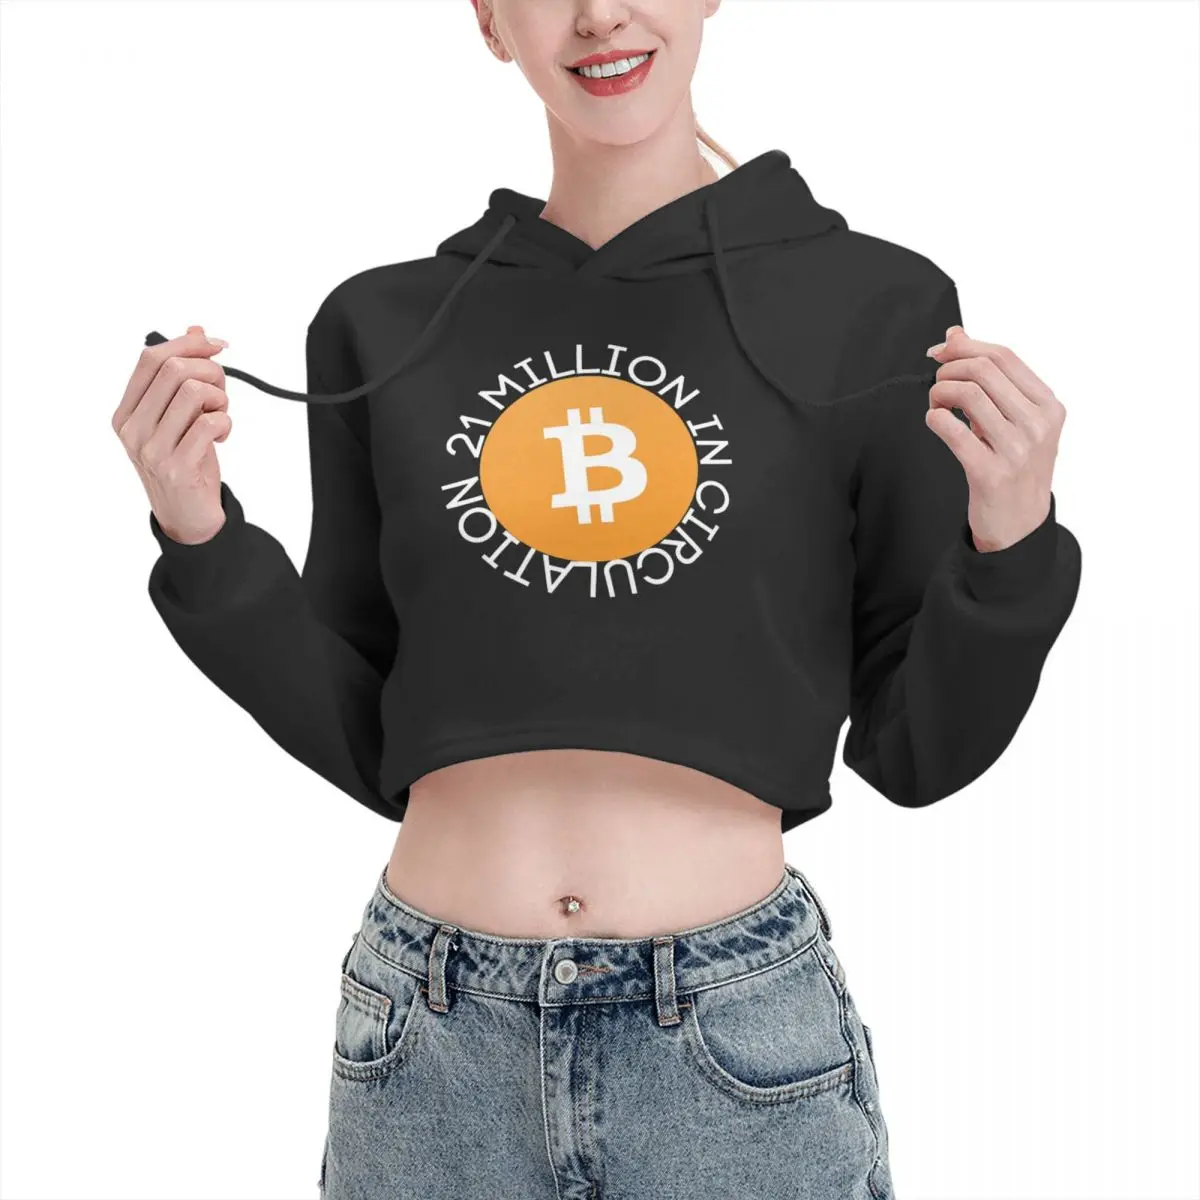 

Open navel Cat Ear Hoodie Sweater BITCOIN - 21 MILLION IN CIRCULATION Hooded rope Humor sexy Print R403 pullover